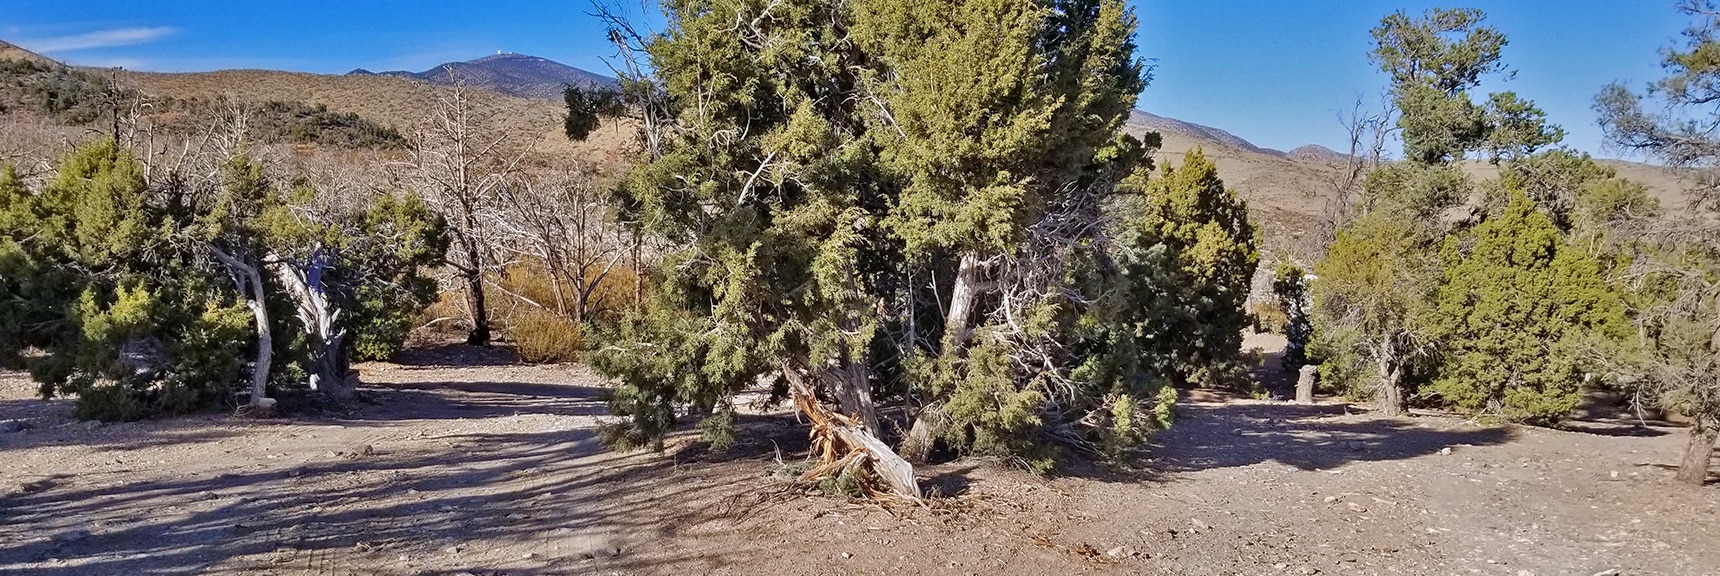 One of Three Camping Areas on Lower Harris Mt. Road | Harris Springs Rd, Harris Mountain Rd | Spring Mountains Wilderness, Nevada